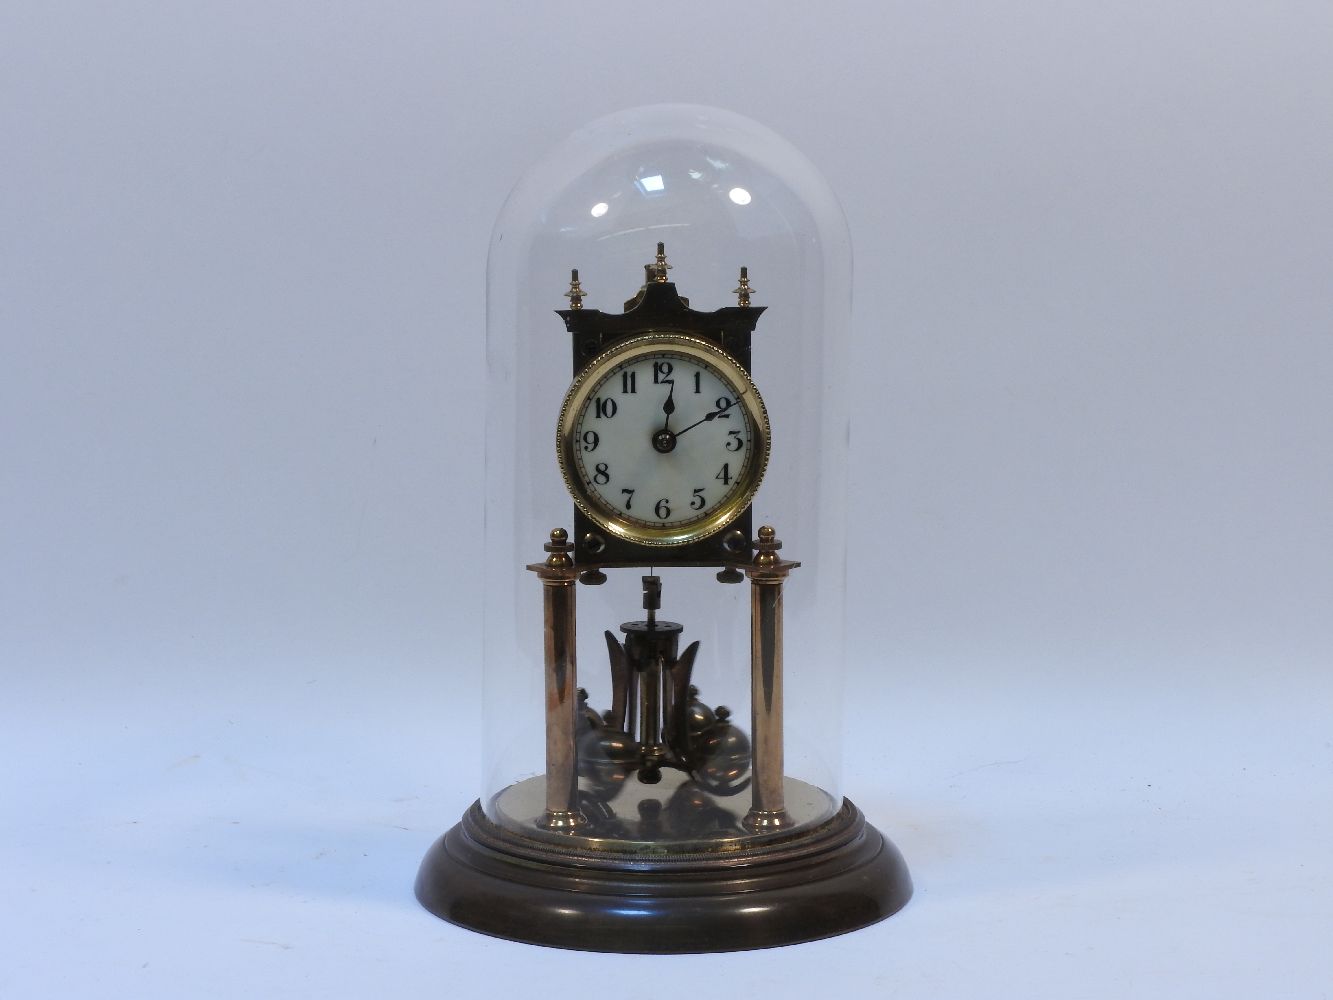 An early 20th century German brass anniversary clock, by Jahresuhren Fabrik, under a glass dome - Image 2 of 2